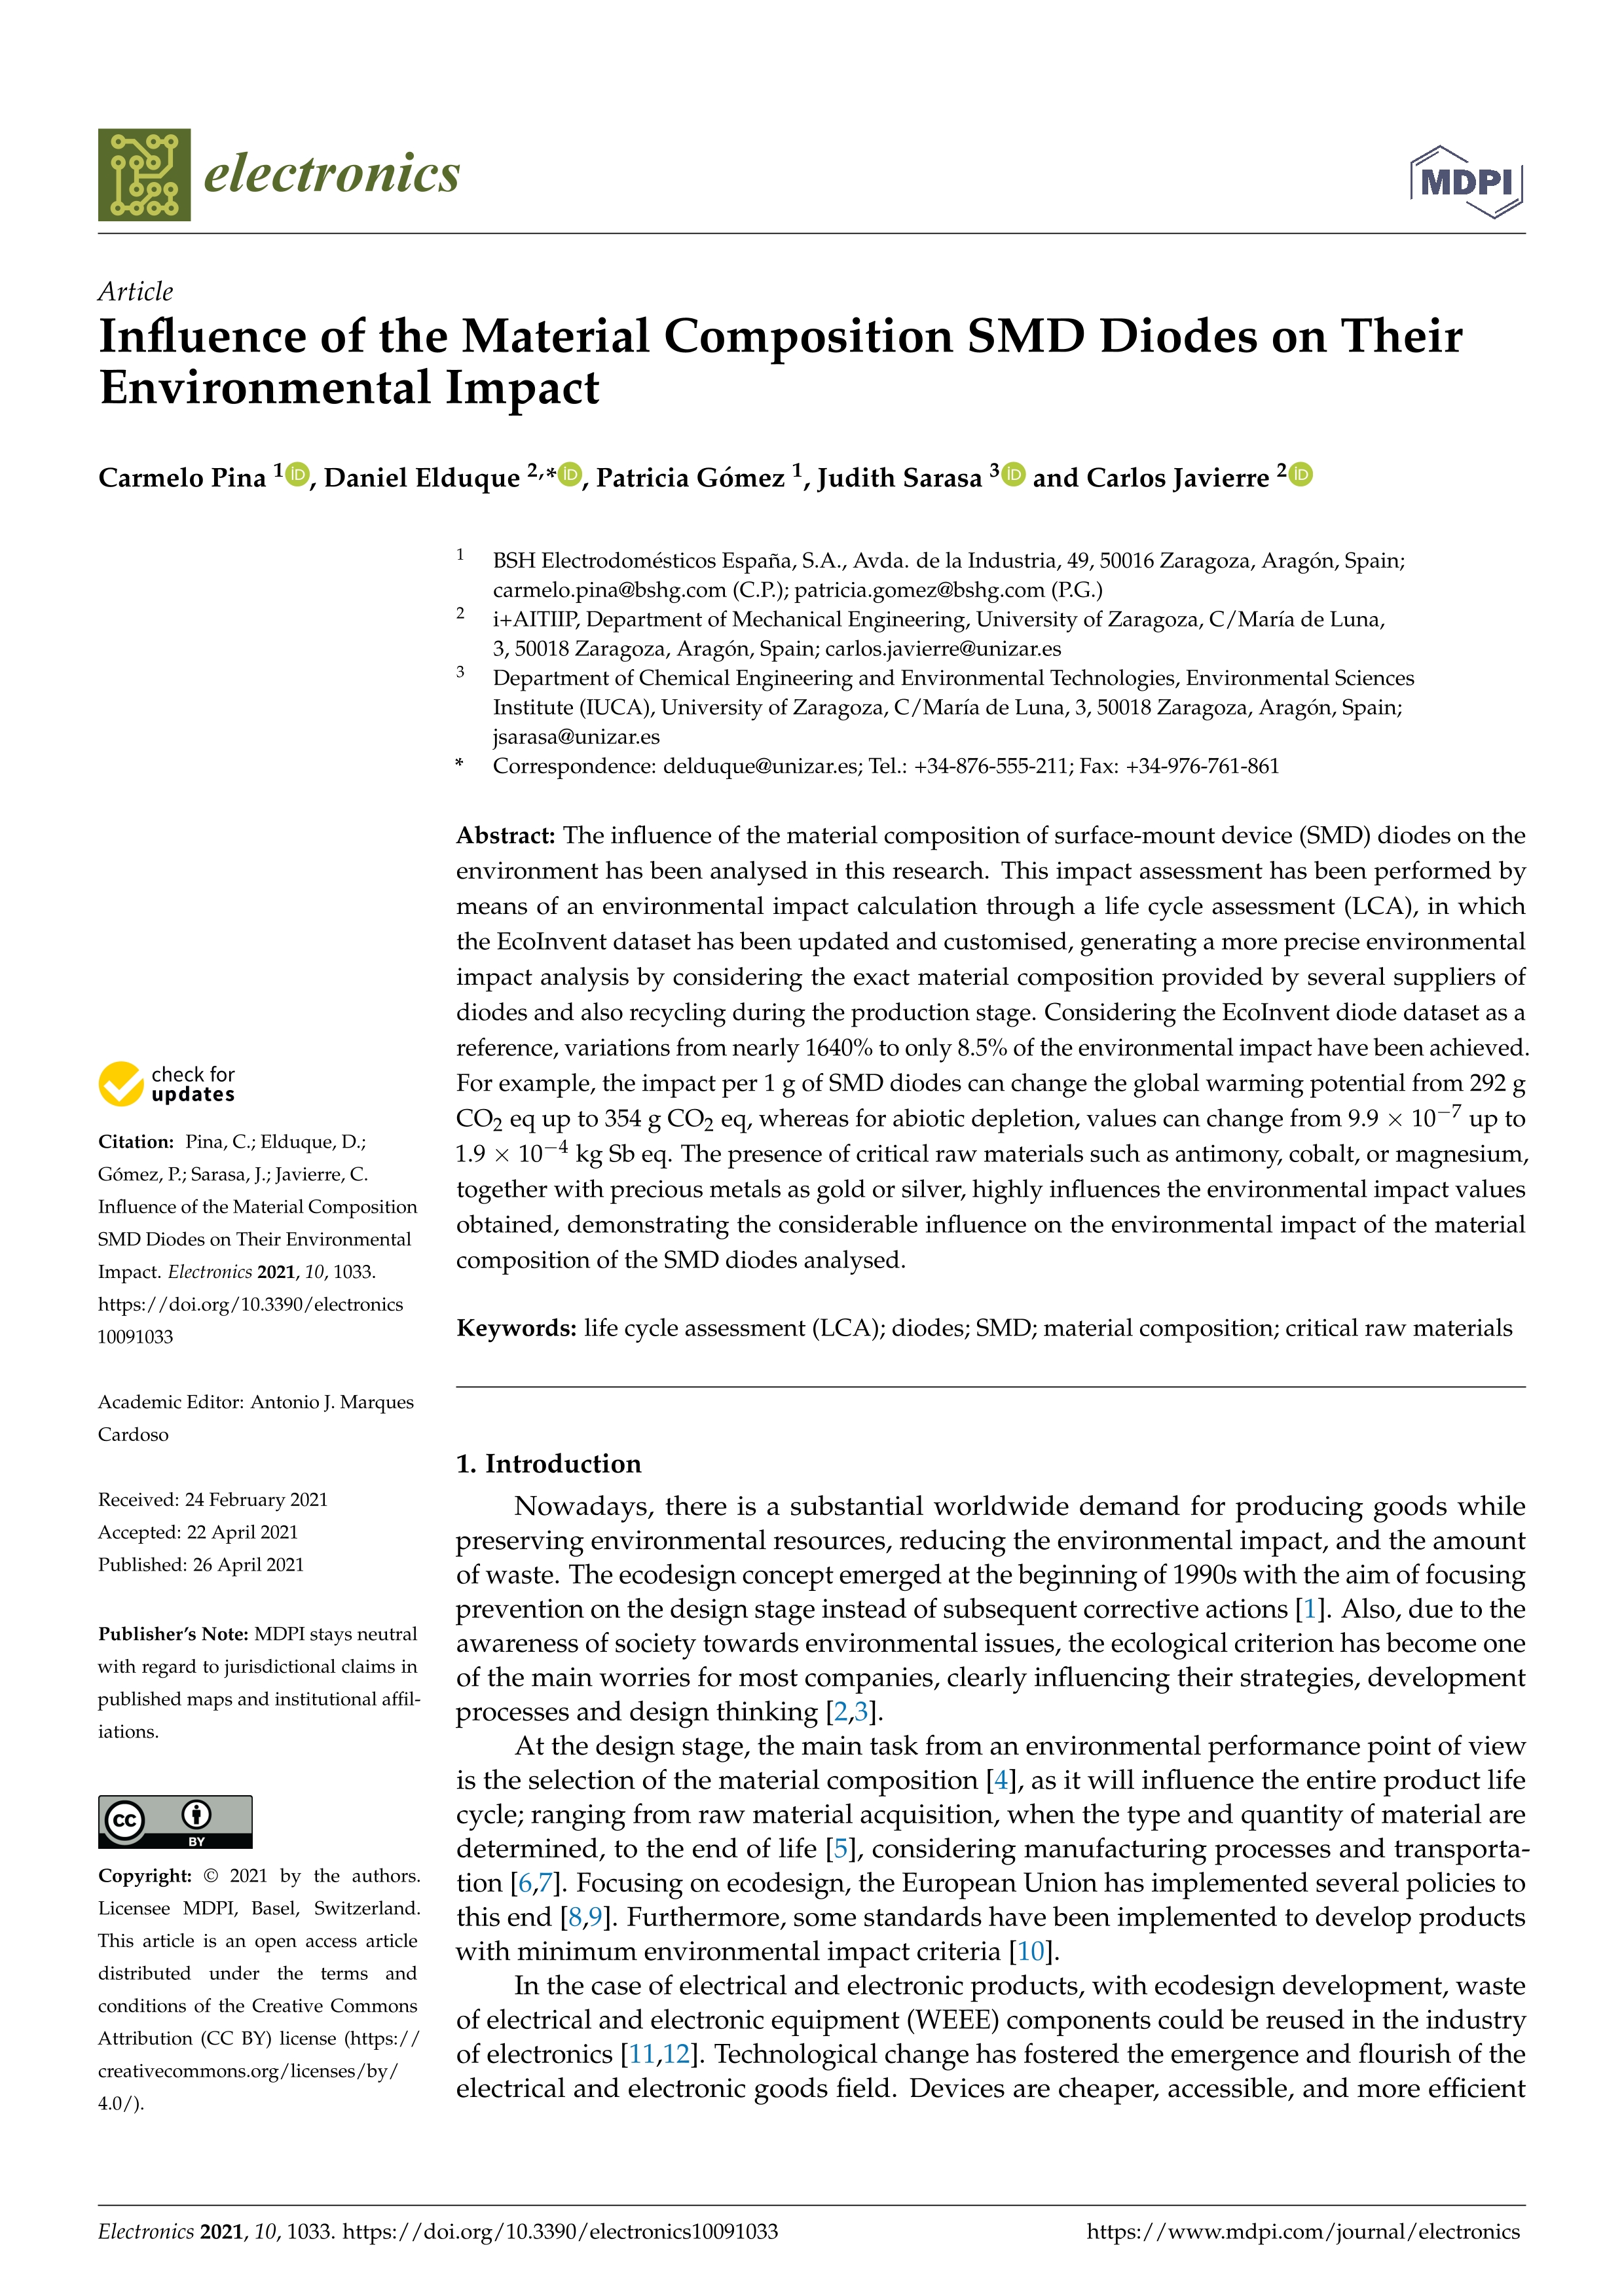 Influence of the material composition SMD diodes on their environmental impact